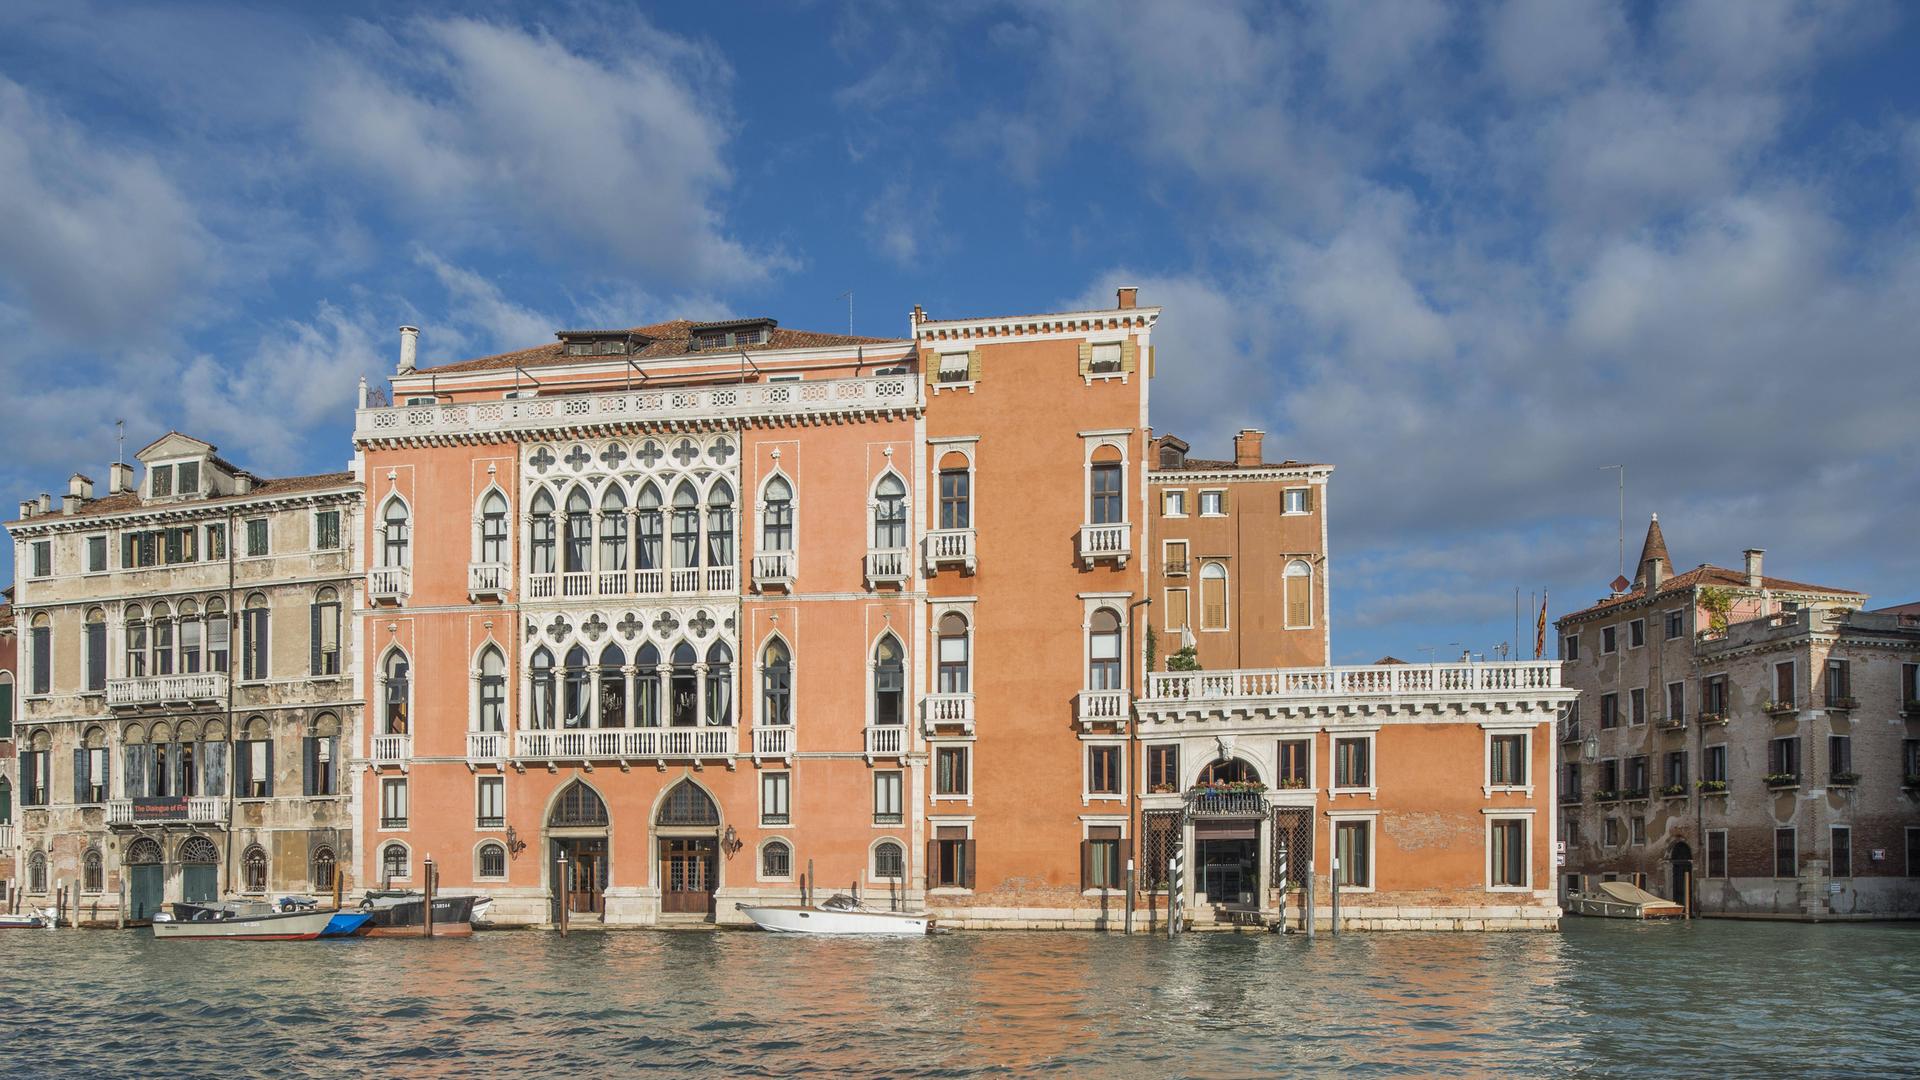 Title: “Venice’s Price and Tourism: A Closer Look at the Costs and Strategies for Preservation”